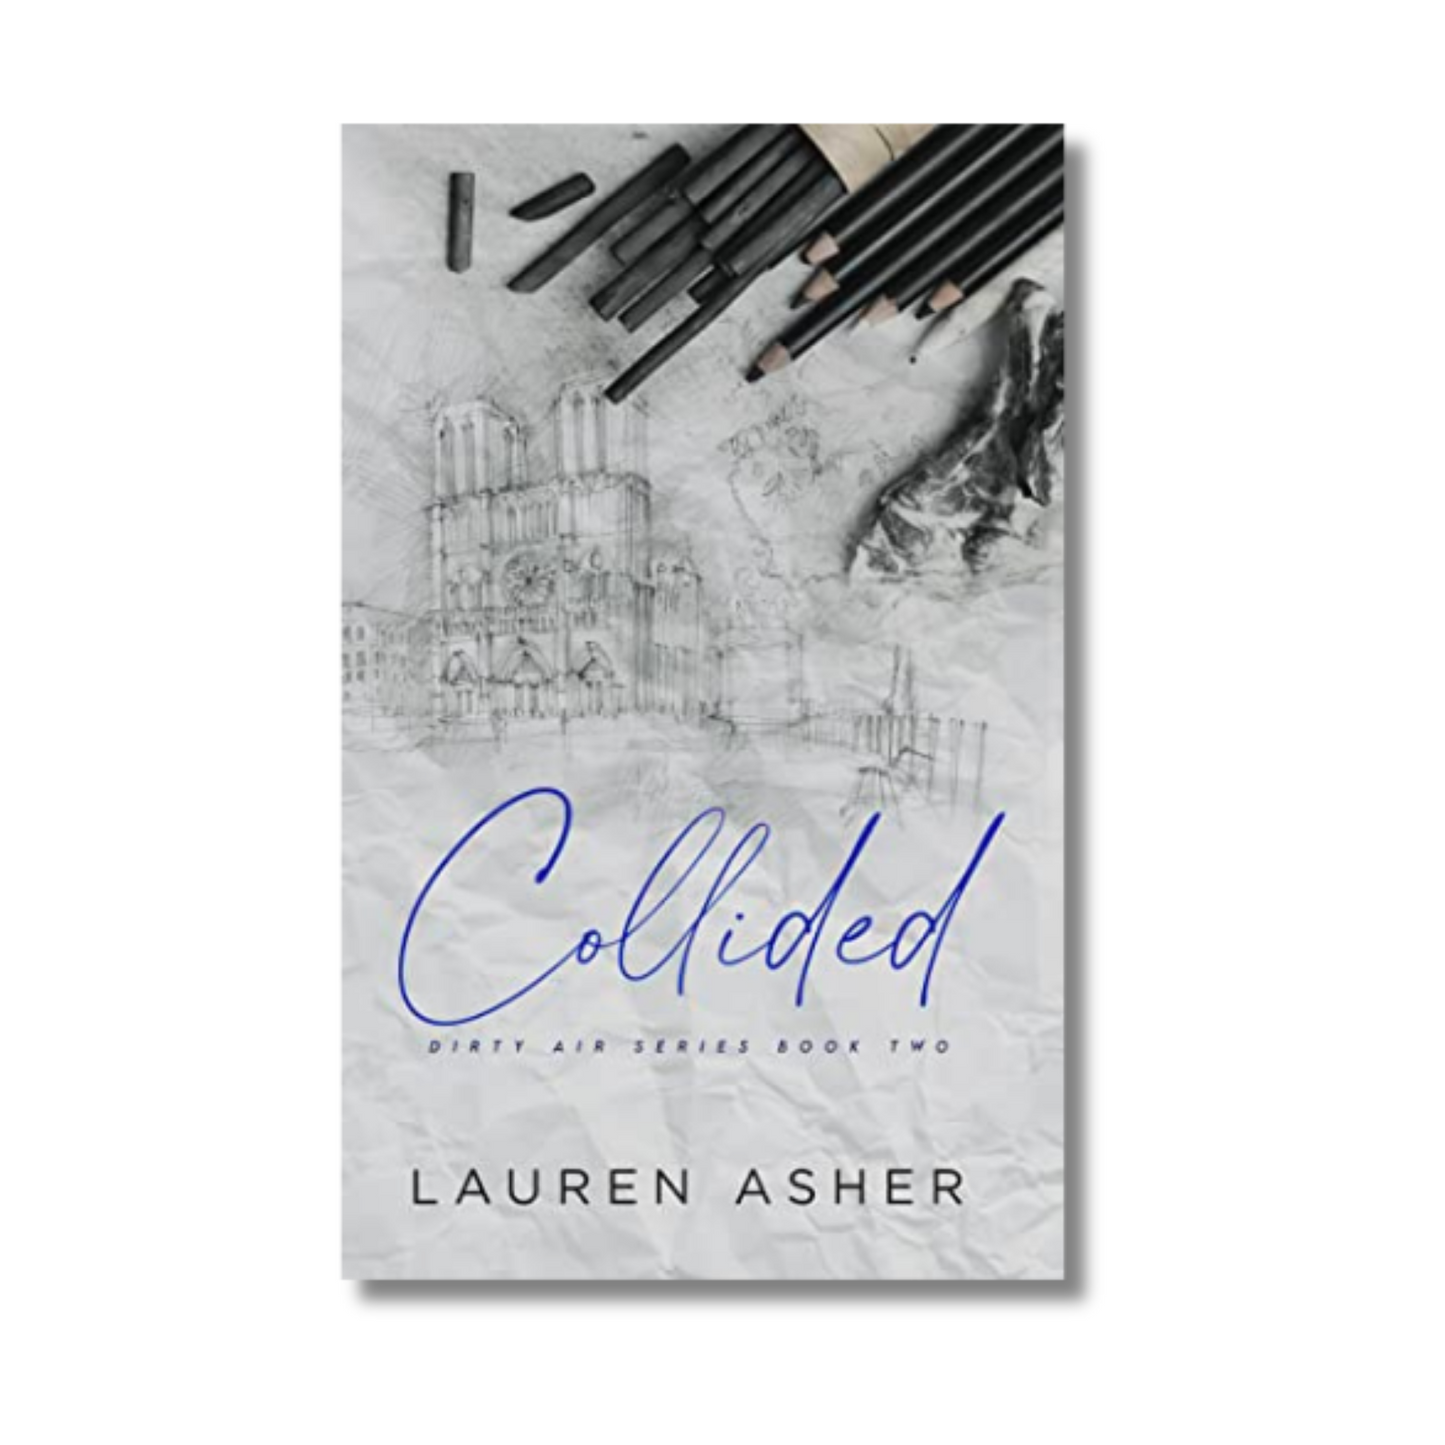 Collided (Dirty Air #2) By Lauren Asher (Paperback)